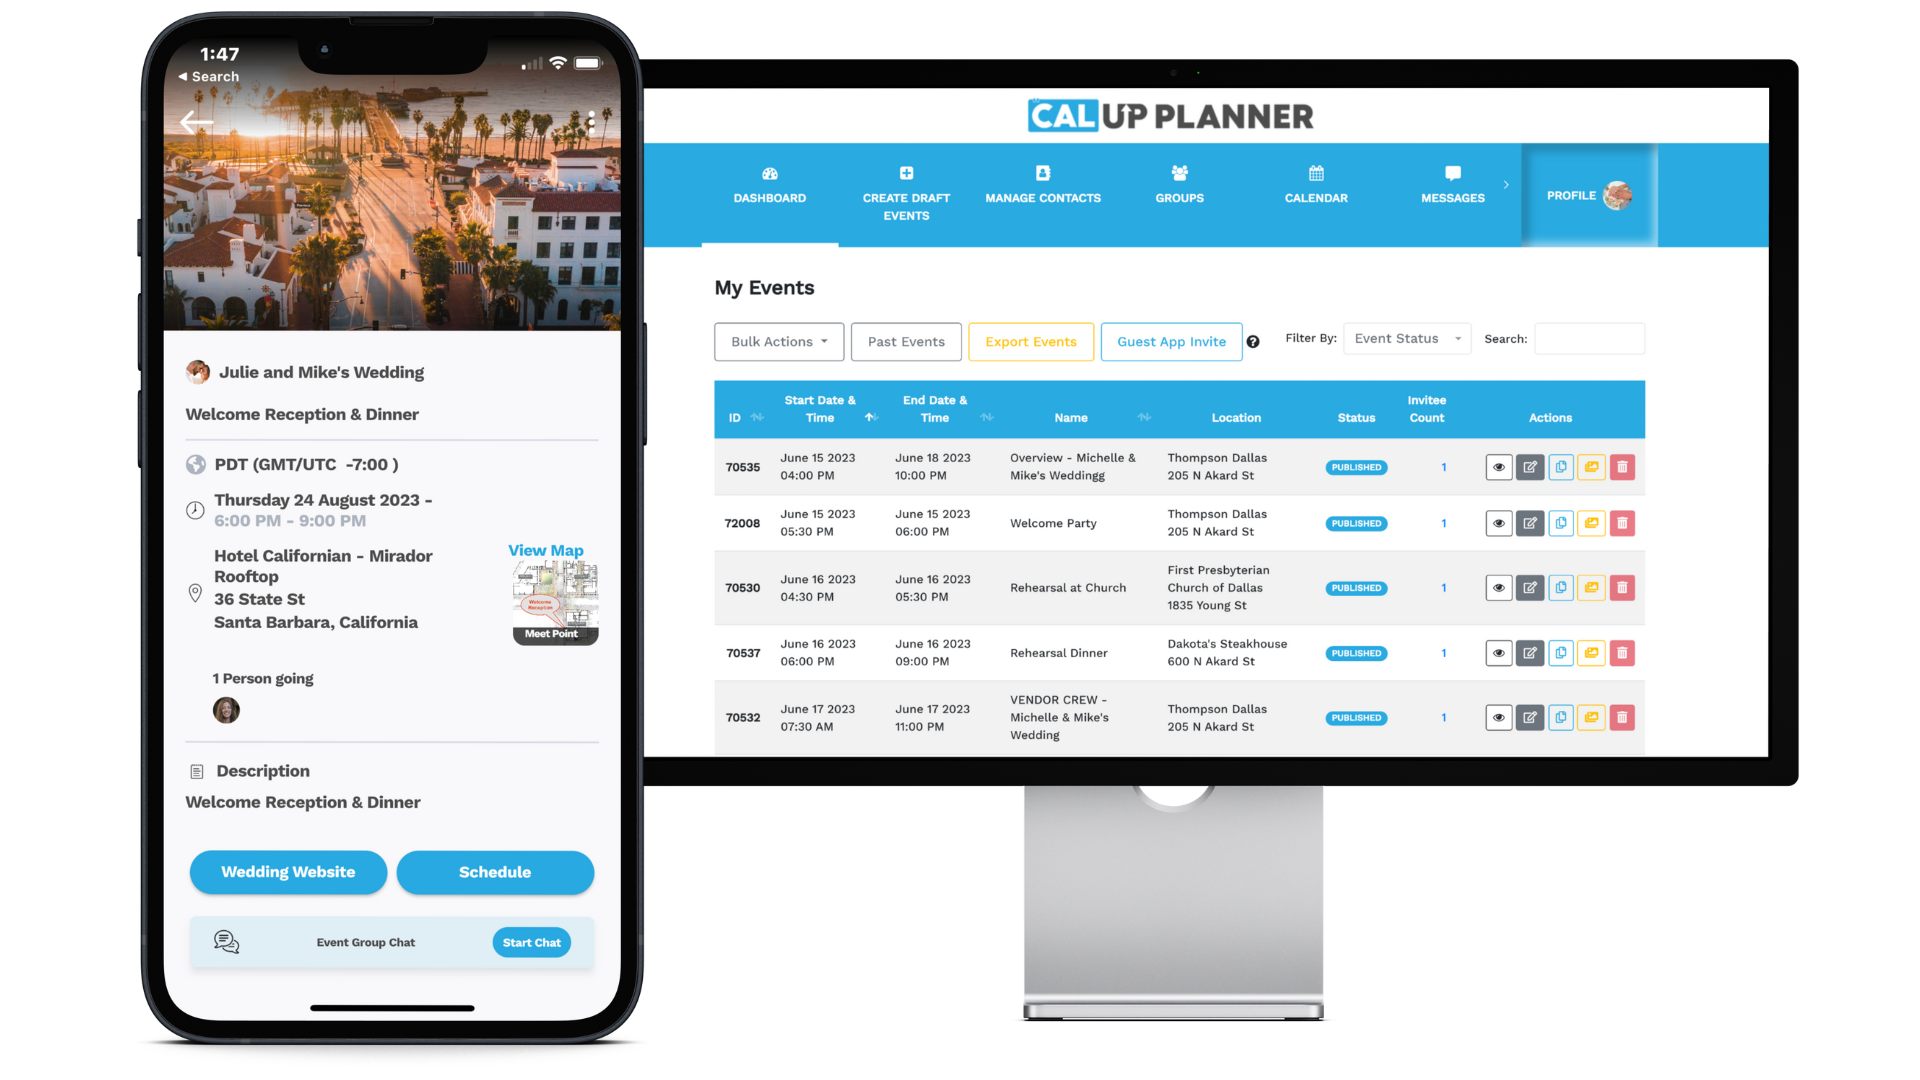 CalUp Planner, with its easy-to-use and intuitive interface, is for planners and Couples who want invest in ensuring their wedding day goes smoothly. With a couple of hours of setup, you be rest assured knowin (2)